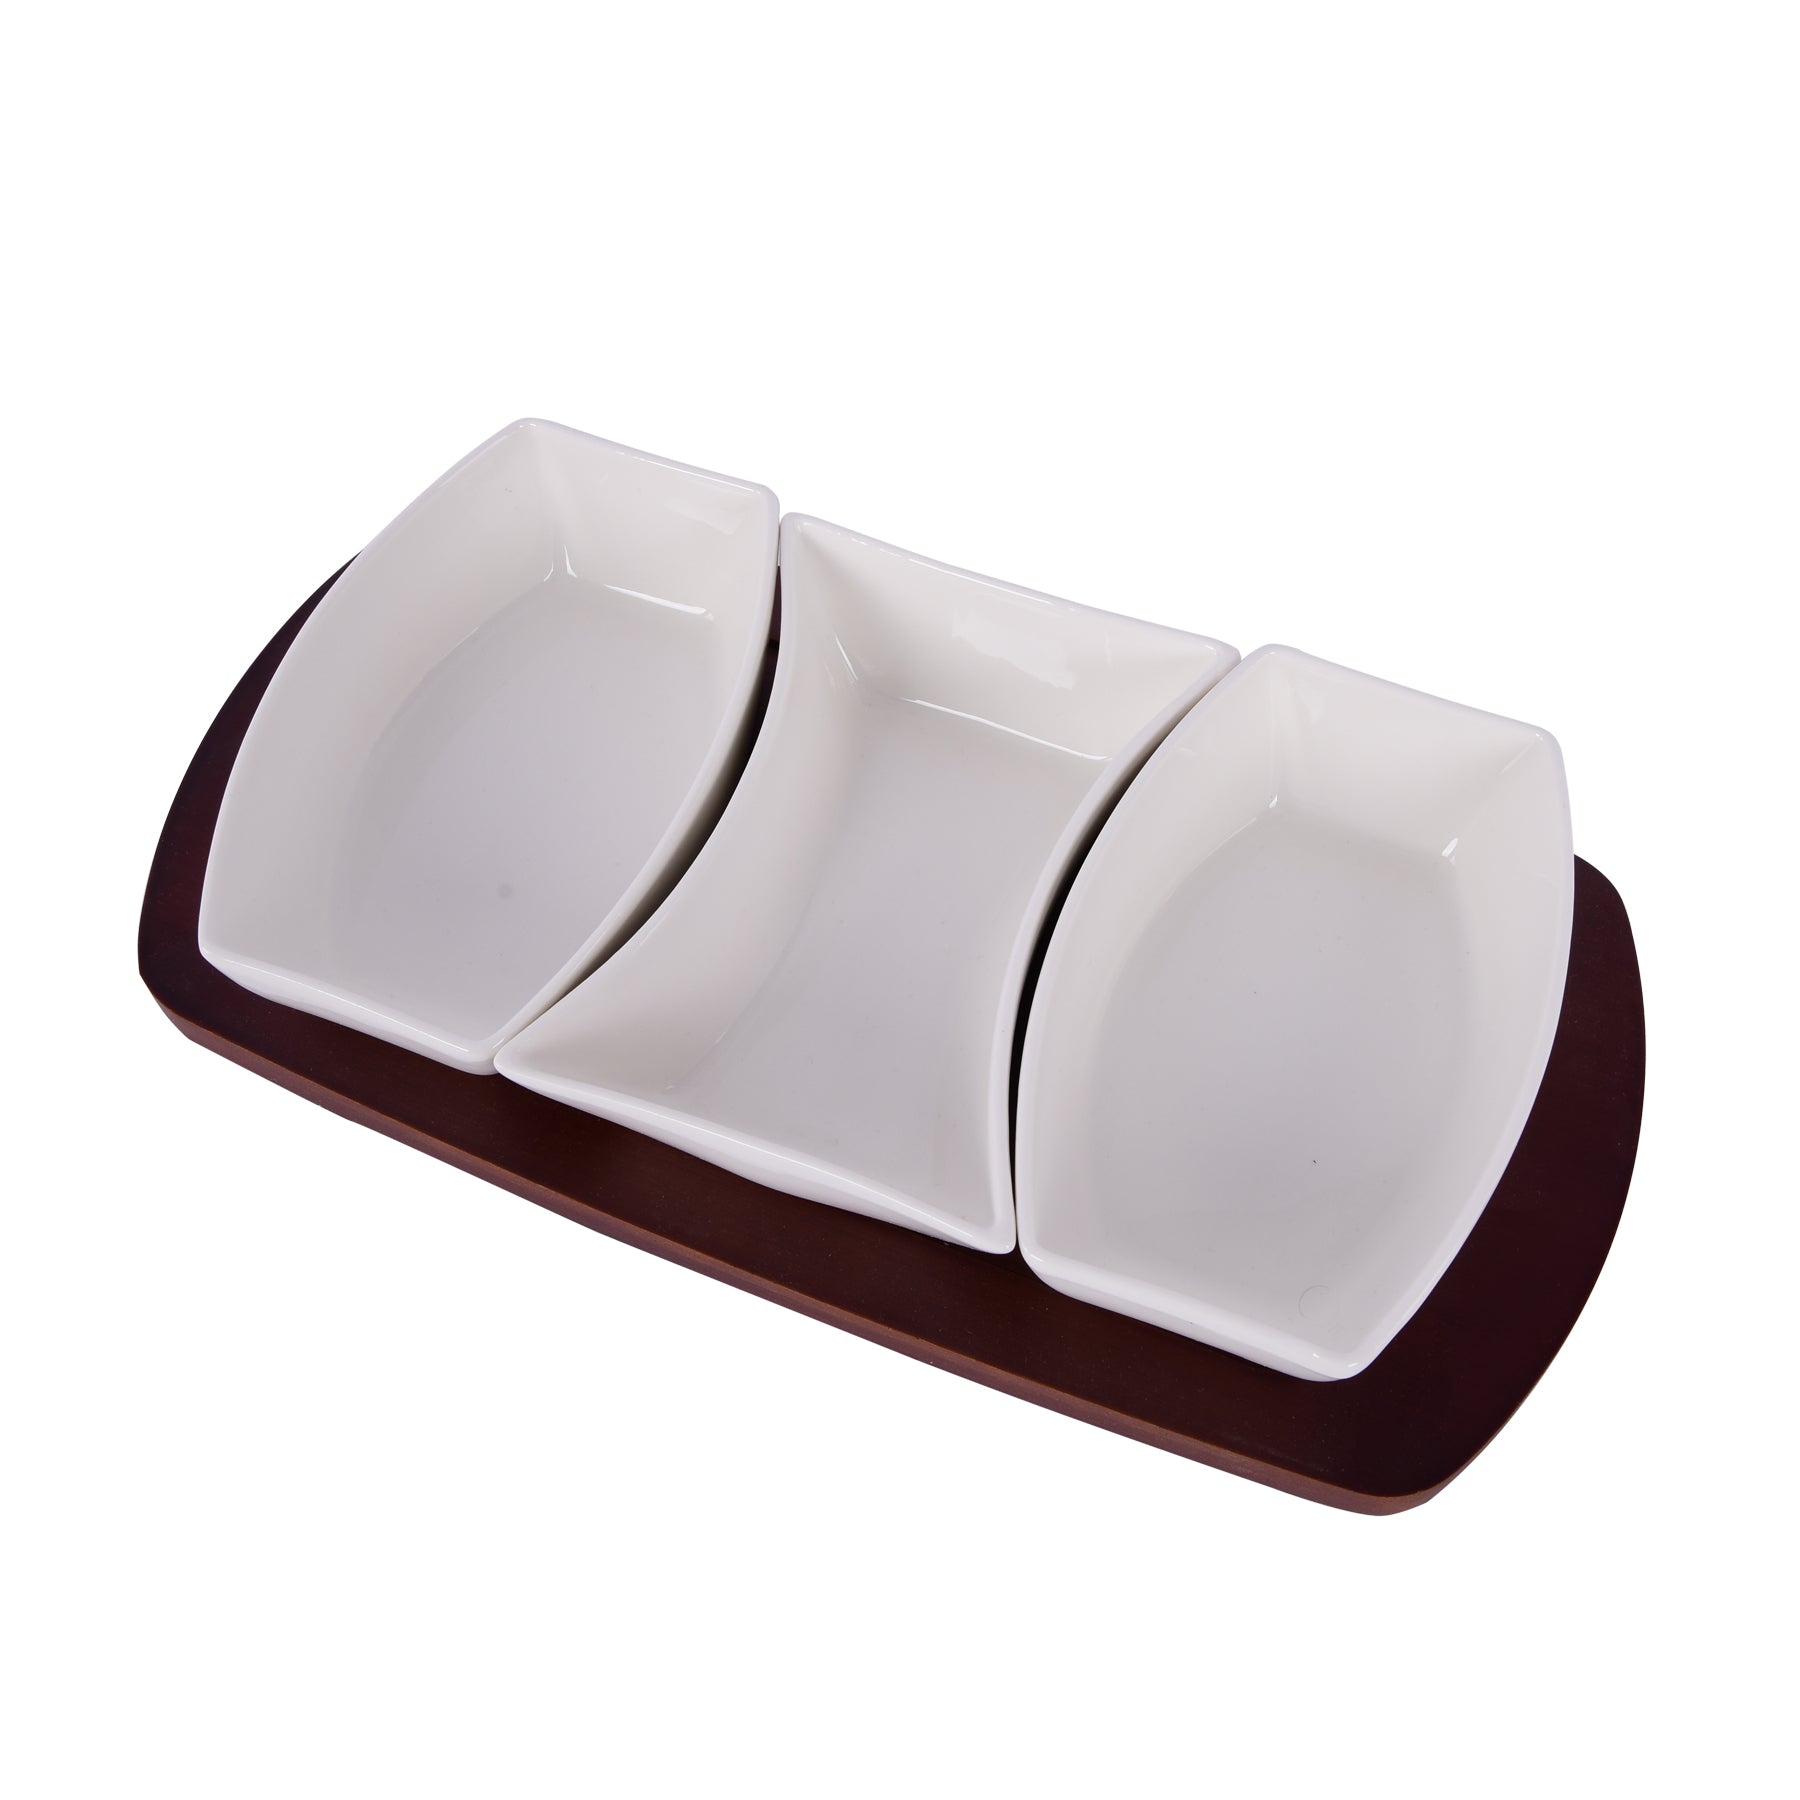 3 Pcs Dishes with wooden board, White